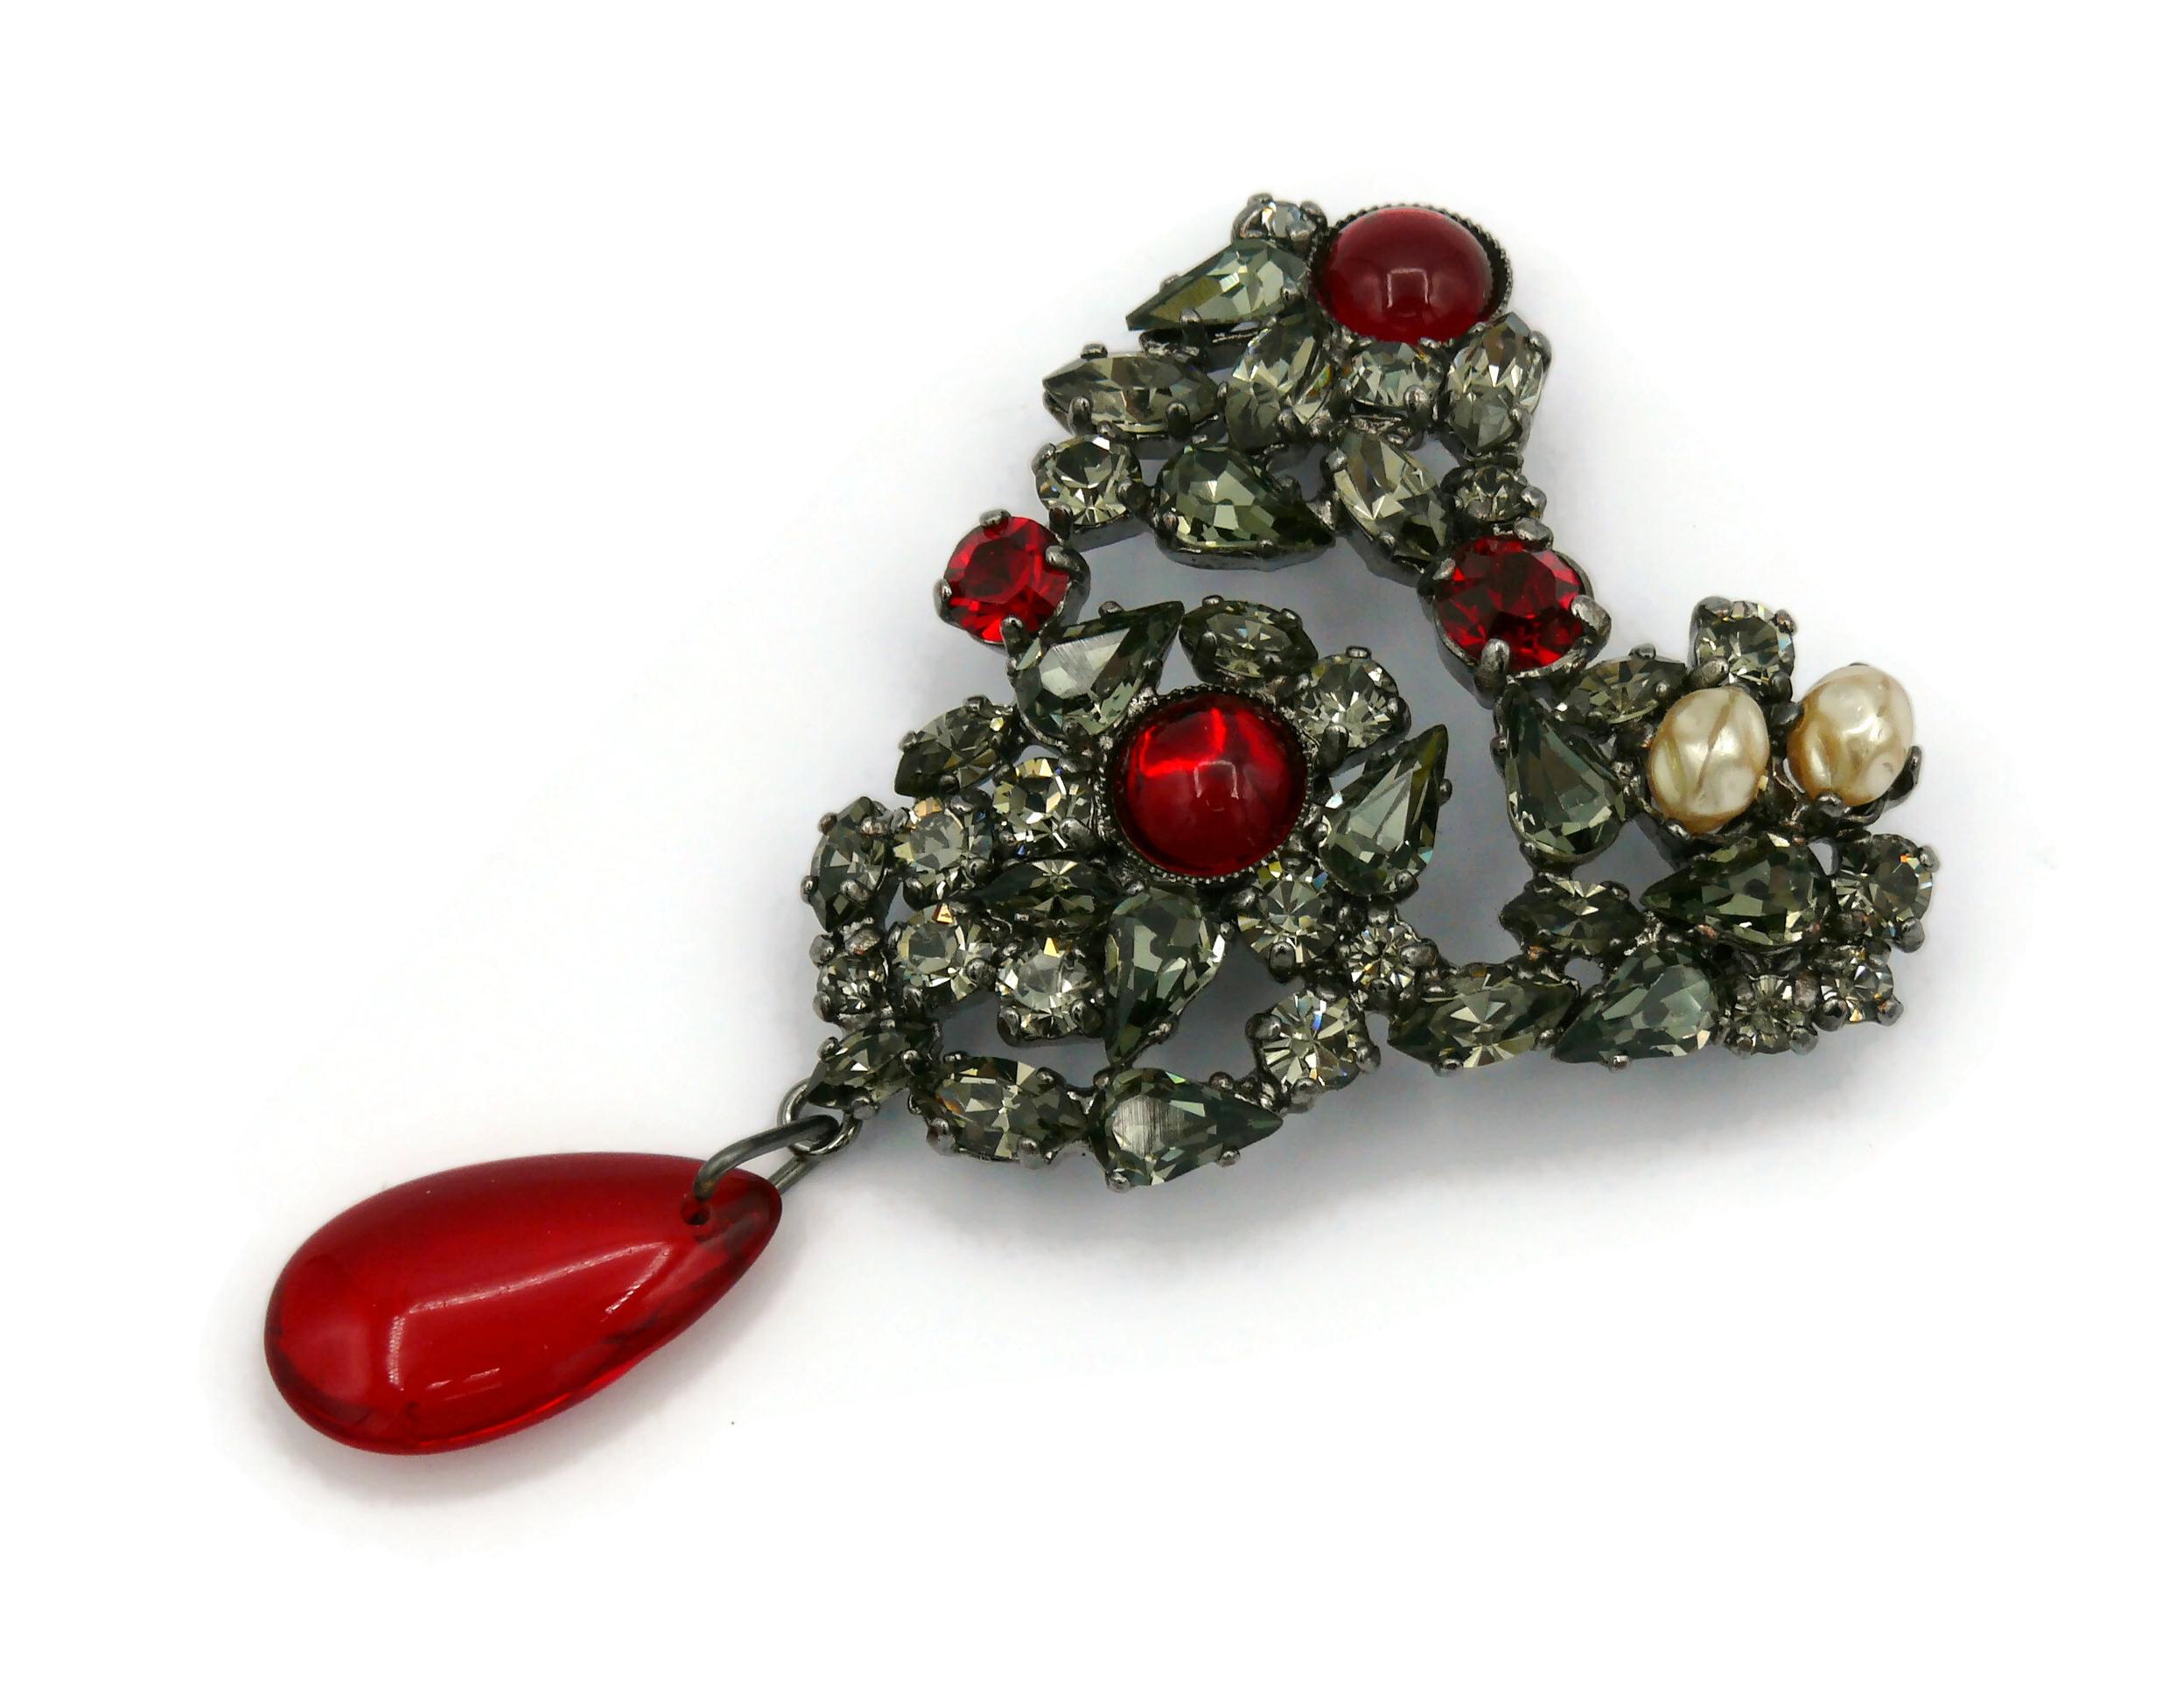 YVES SAINT LAURENT Haute Couture Iconic Bejeweled Heart Brooch 1